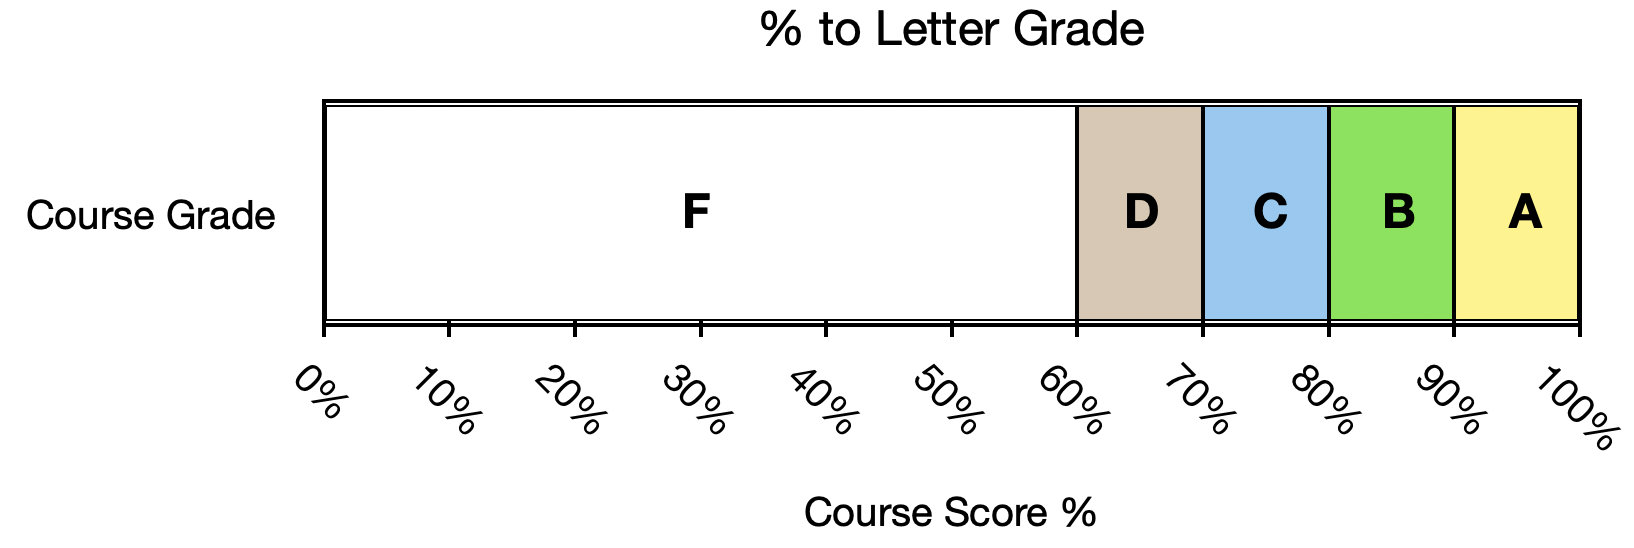 Percent to Letter